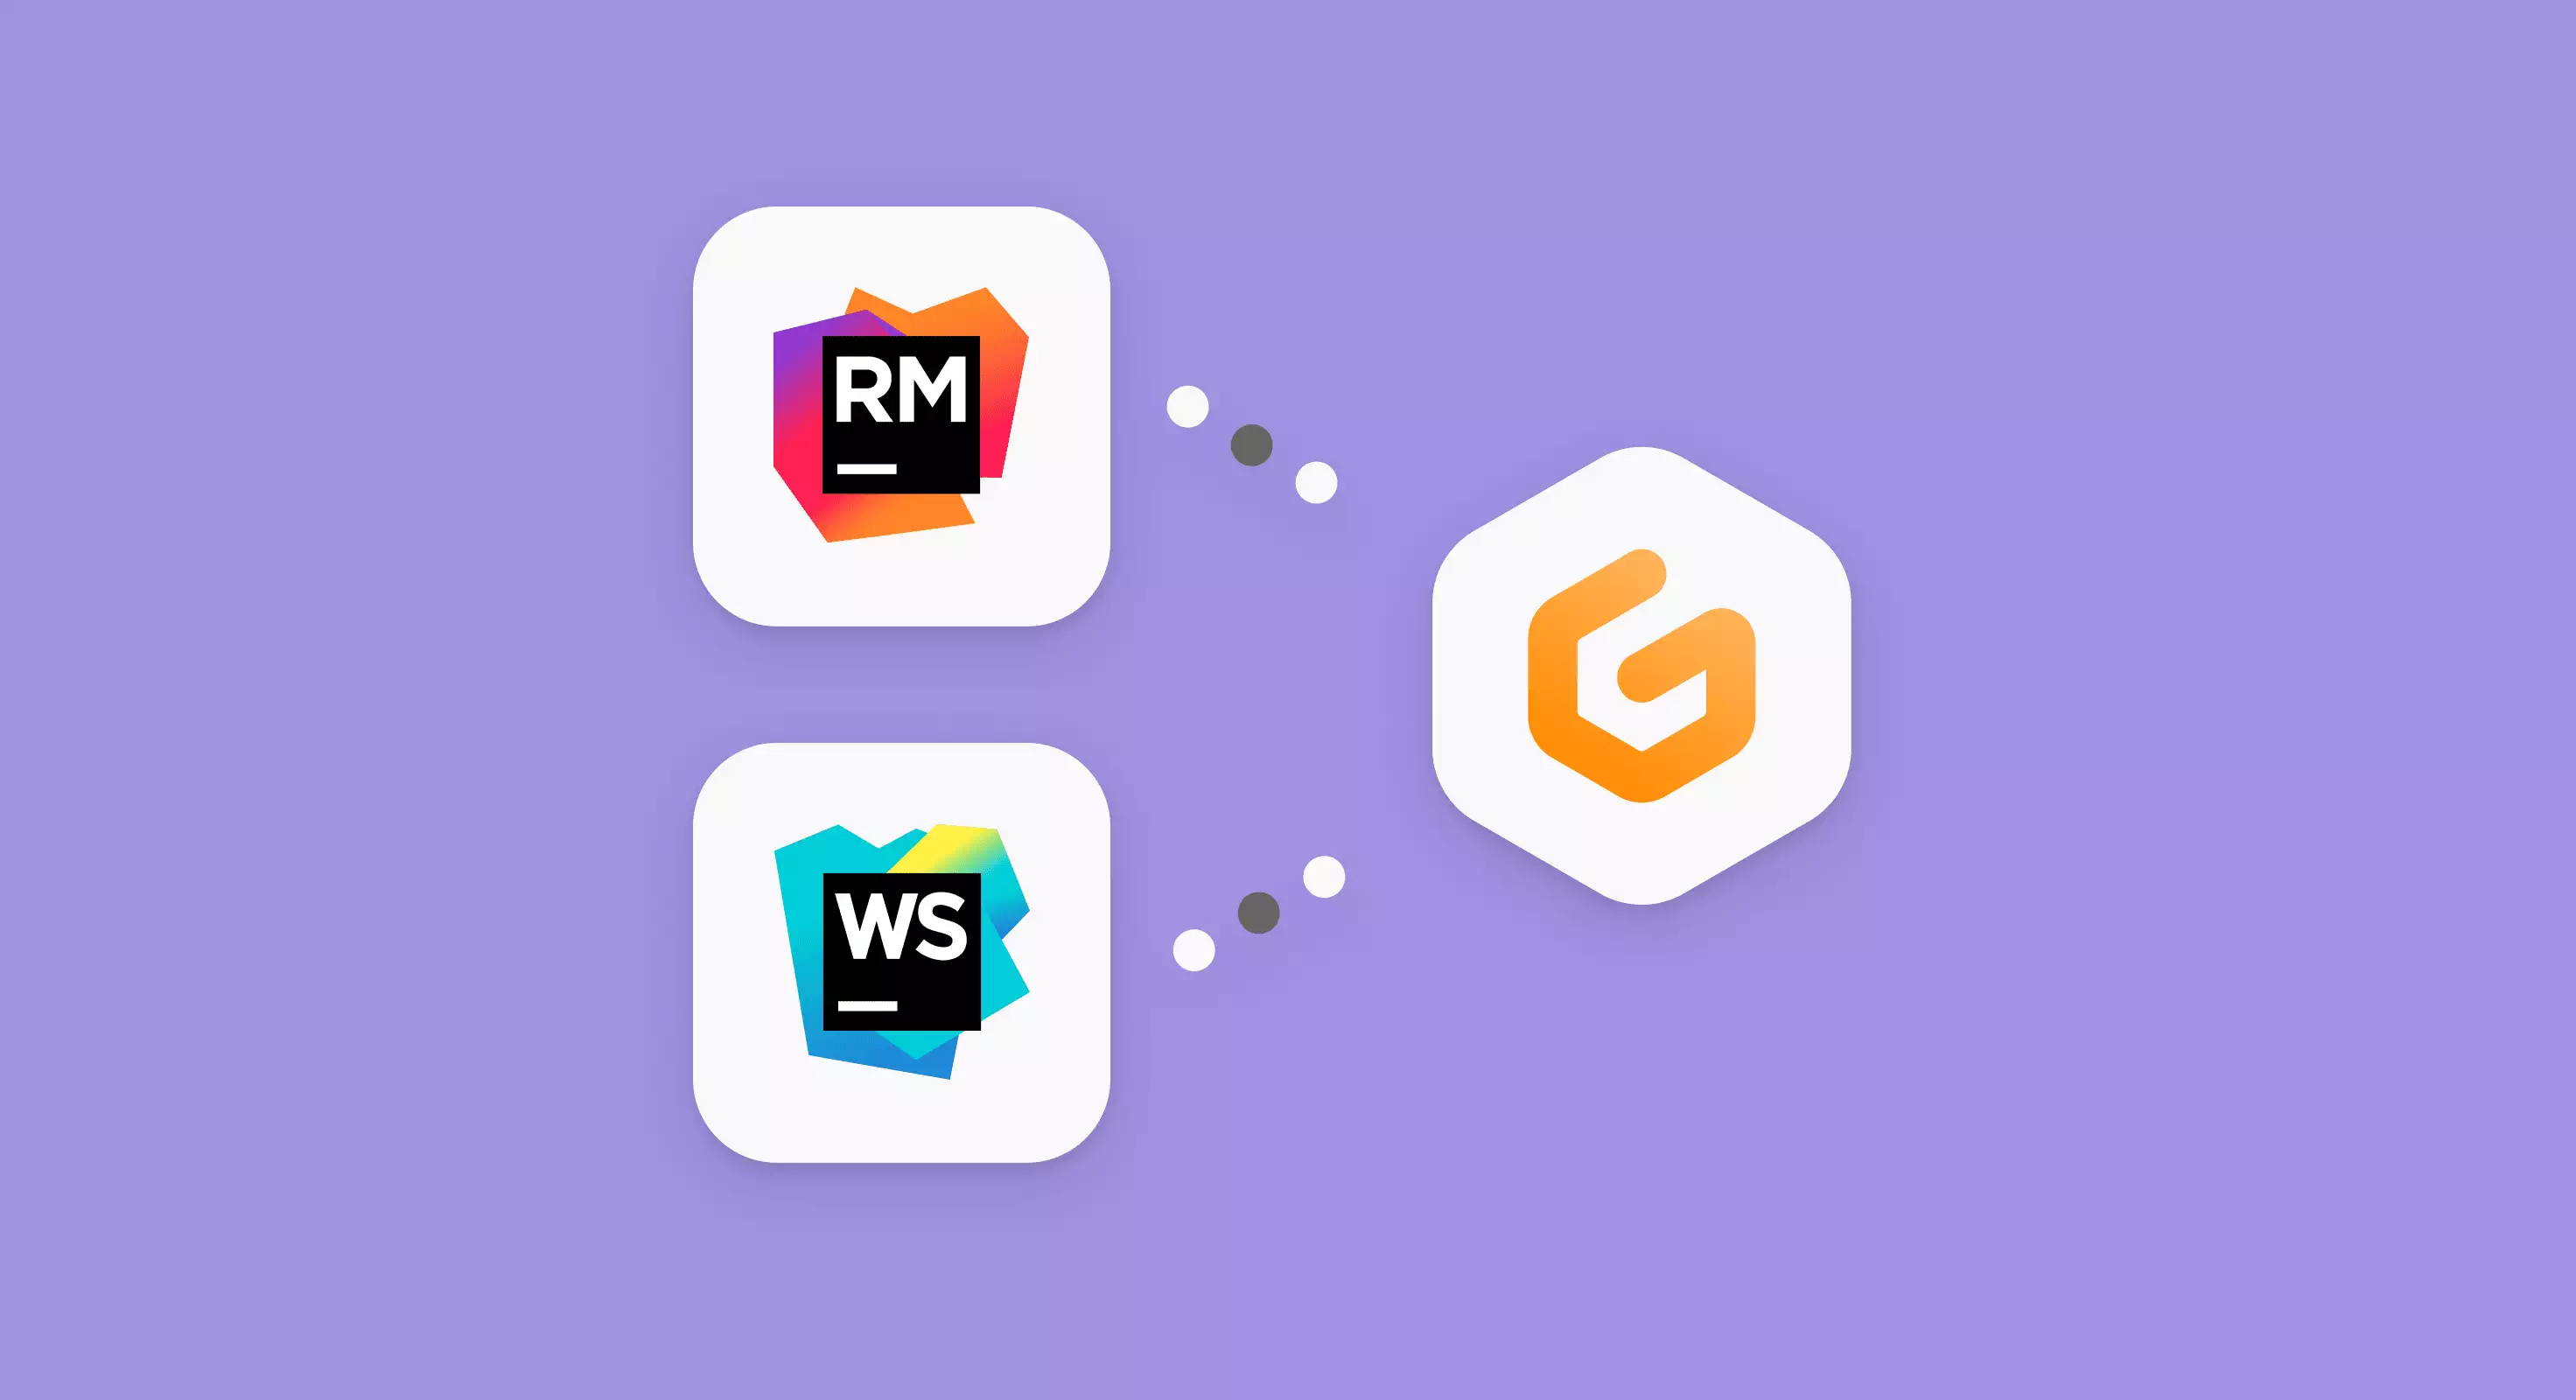 JetBrains RubyMine and WebStorm logos connected to a Gitpod logo